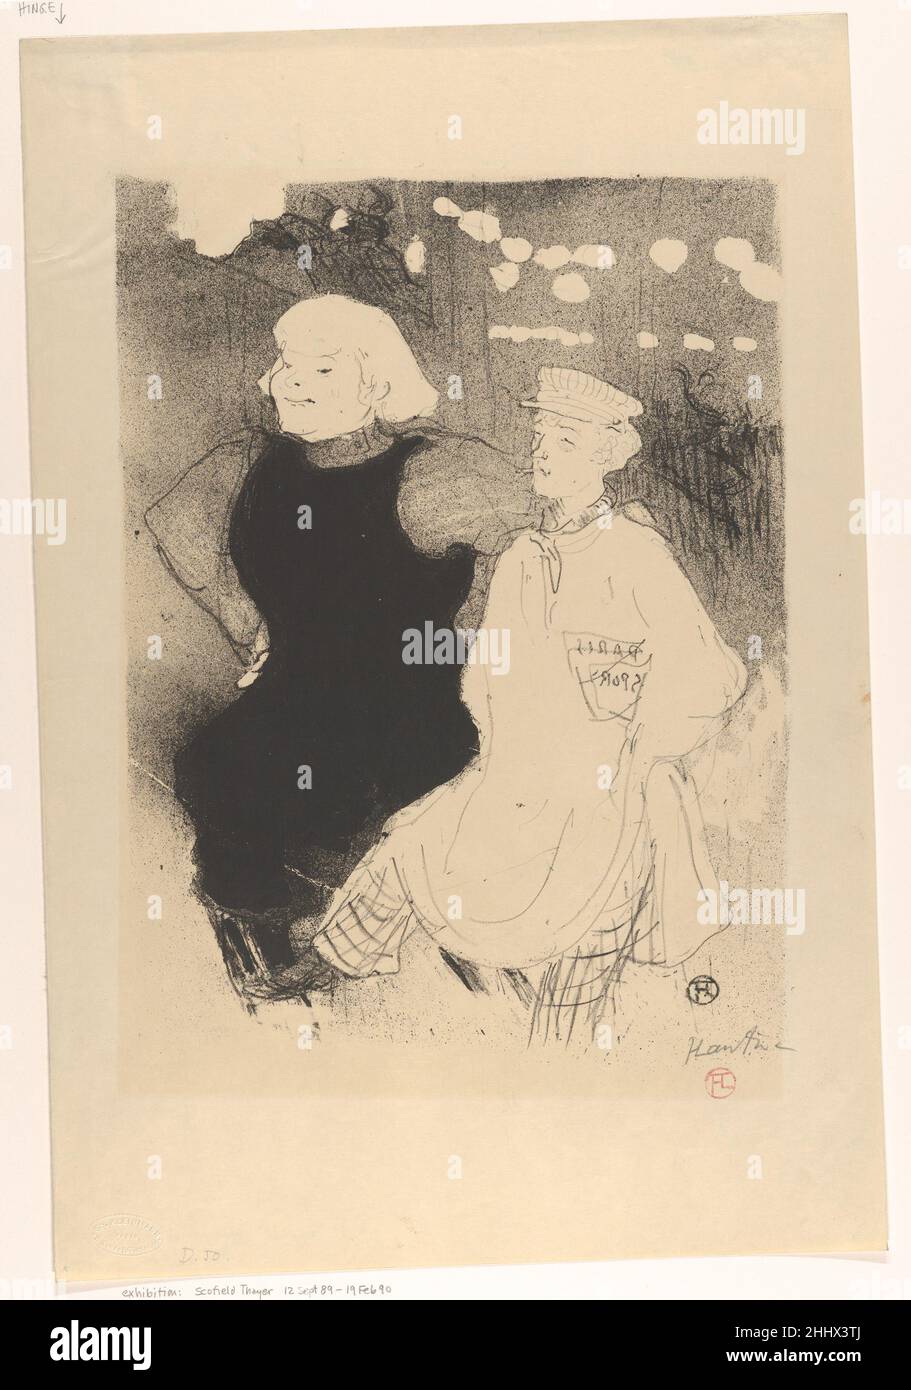 At the Moulin Rouge: The Franco-Russian Alliance 1893 Henri de Toulouse-Lautrec French This lithograph was reproduced by L'Escarmouche in its January 7, 1894 issue.. At the Moulin Rouge: The Franco-Russian Alliance  334396 Stock Photo